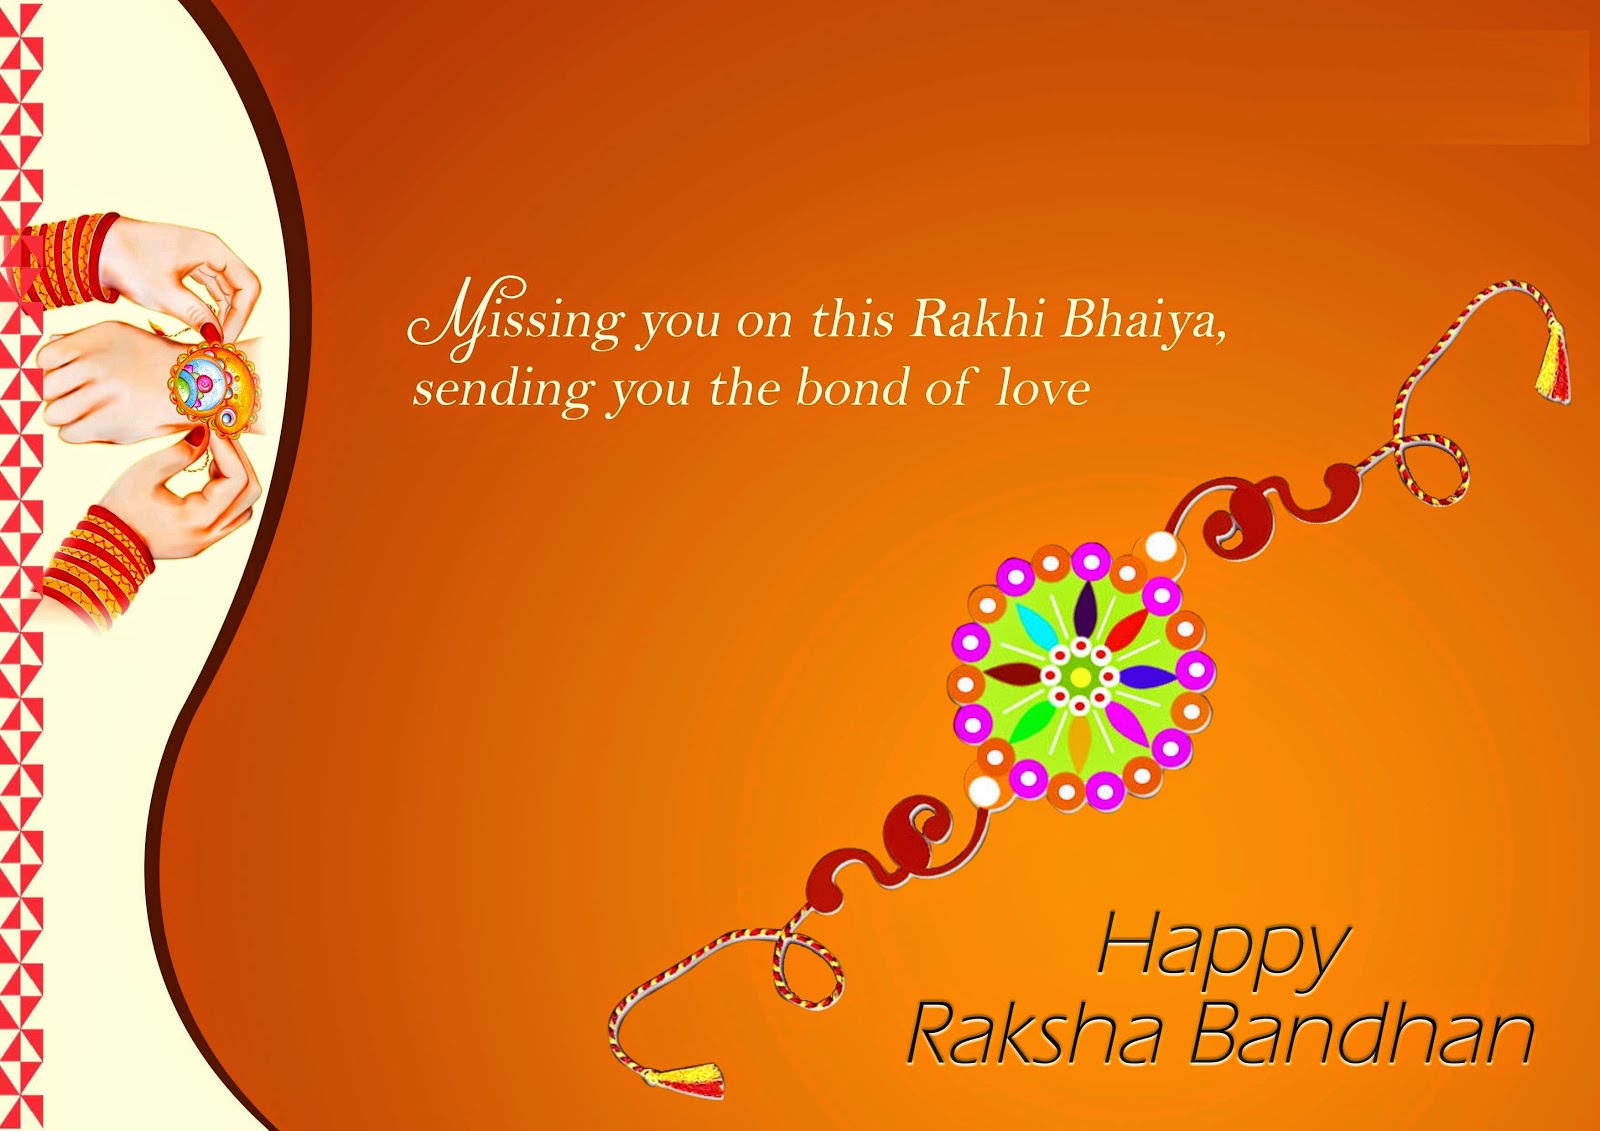 Happy Raksha Bandhan Quotes, wishes for Brother and Sister ...